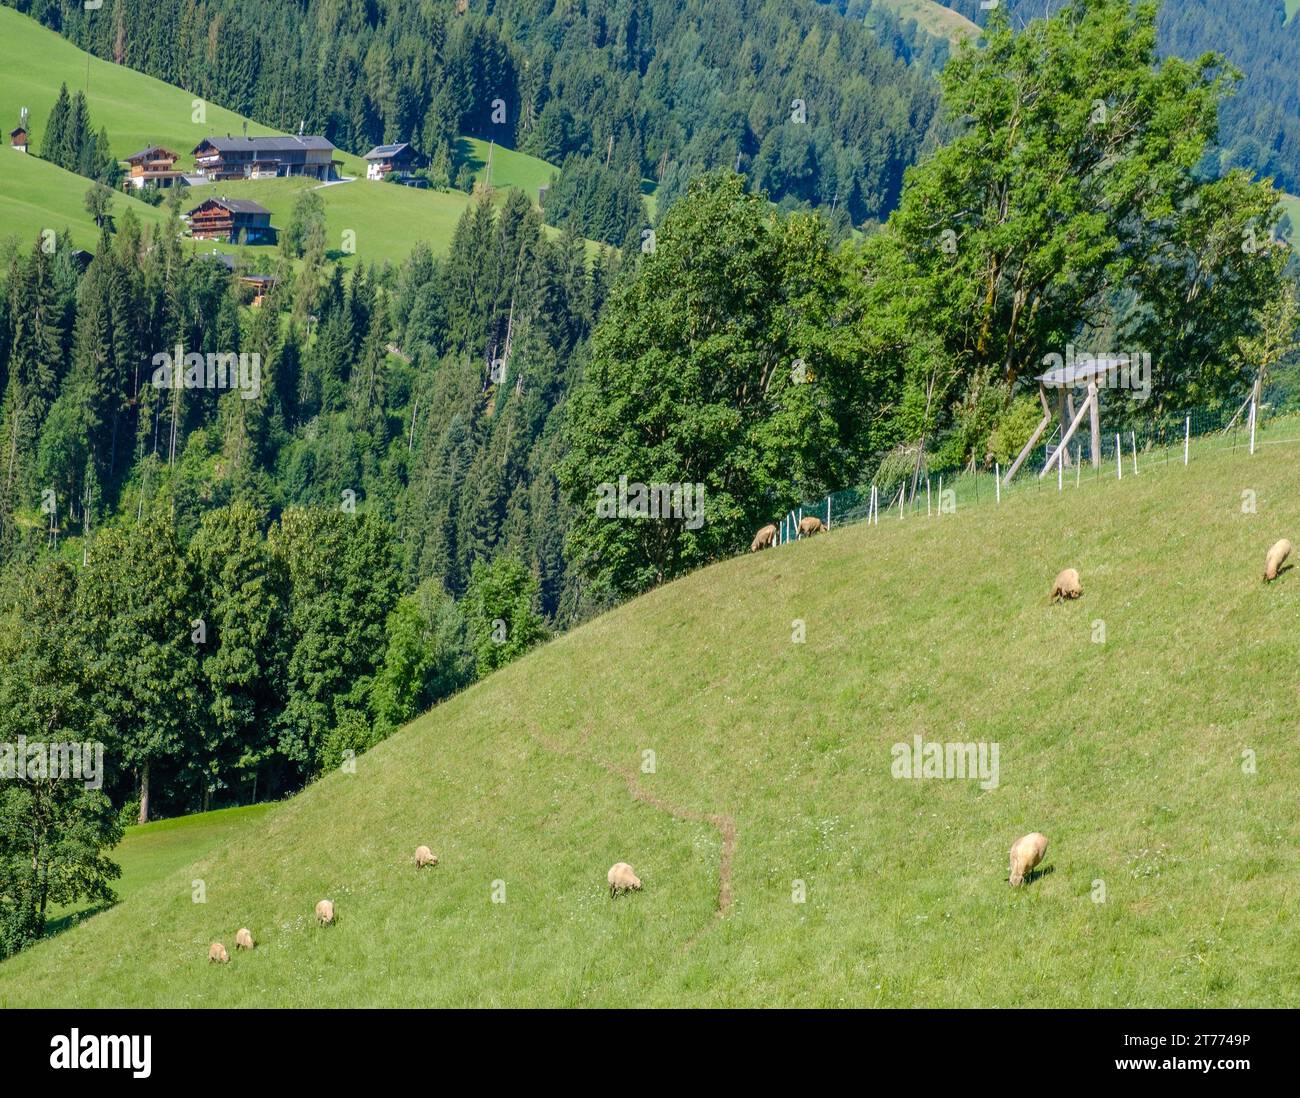 Sheep grazing on steeply sloping pastures with tall trees & houses in background in Alpine village of Alpbach, Austria. Stock Photo